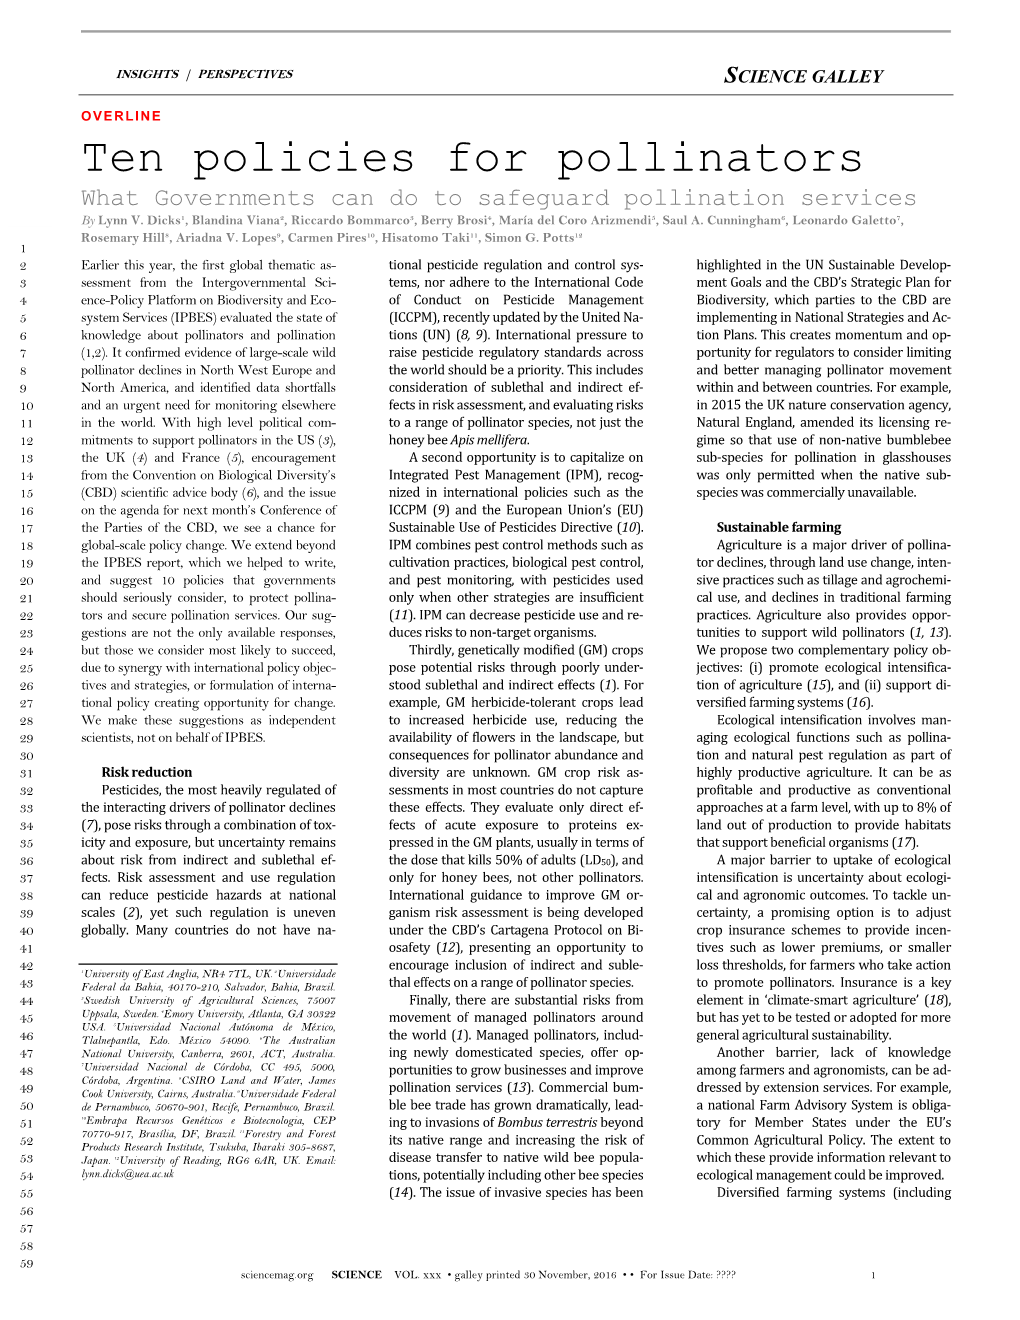 Pollinators What Governments Can Do to Safeguard Pollination Services by Lynn V